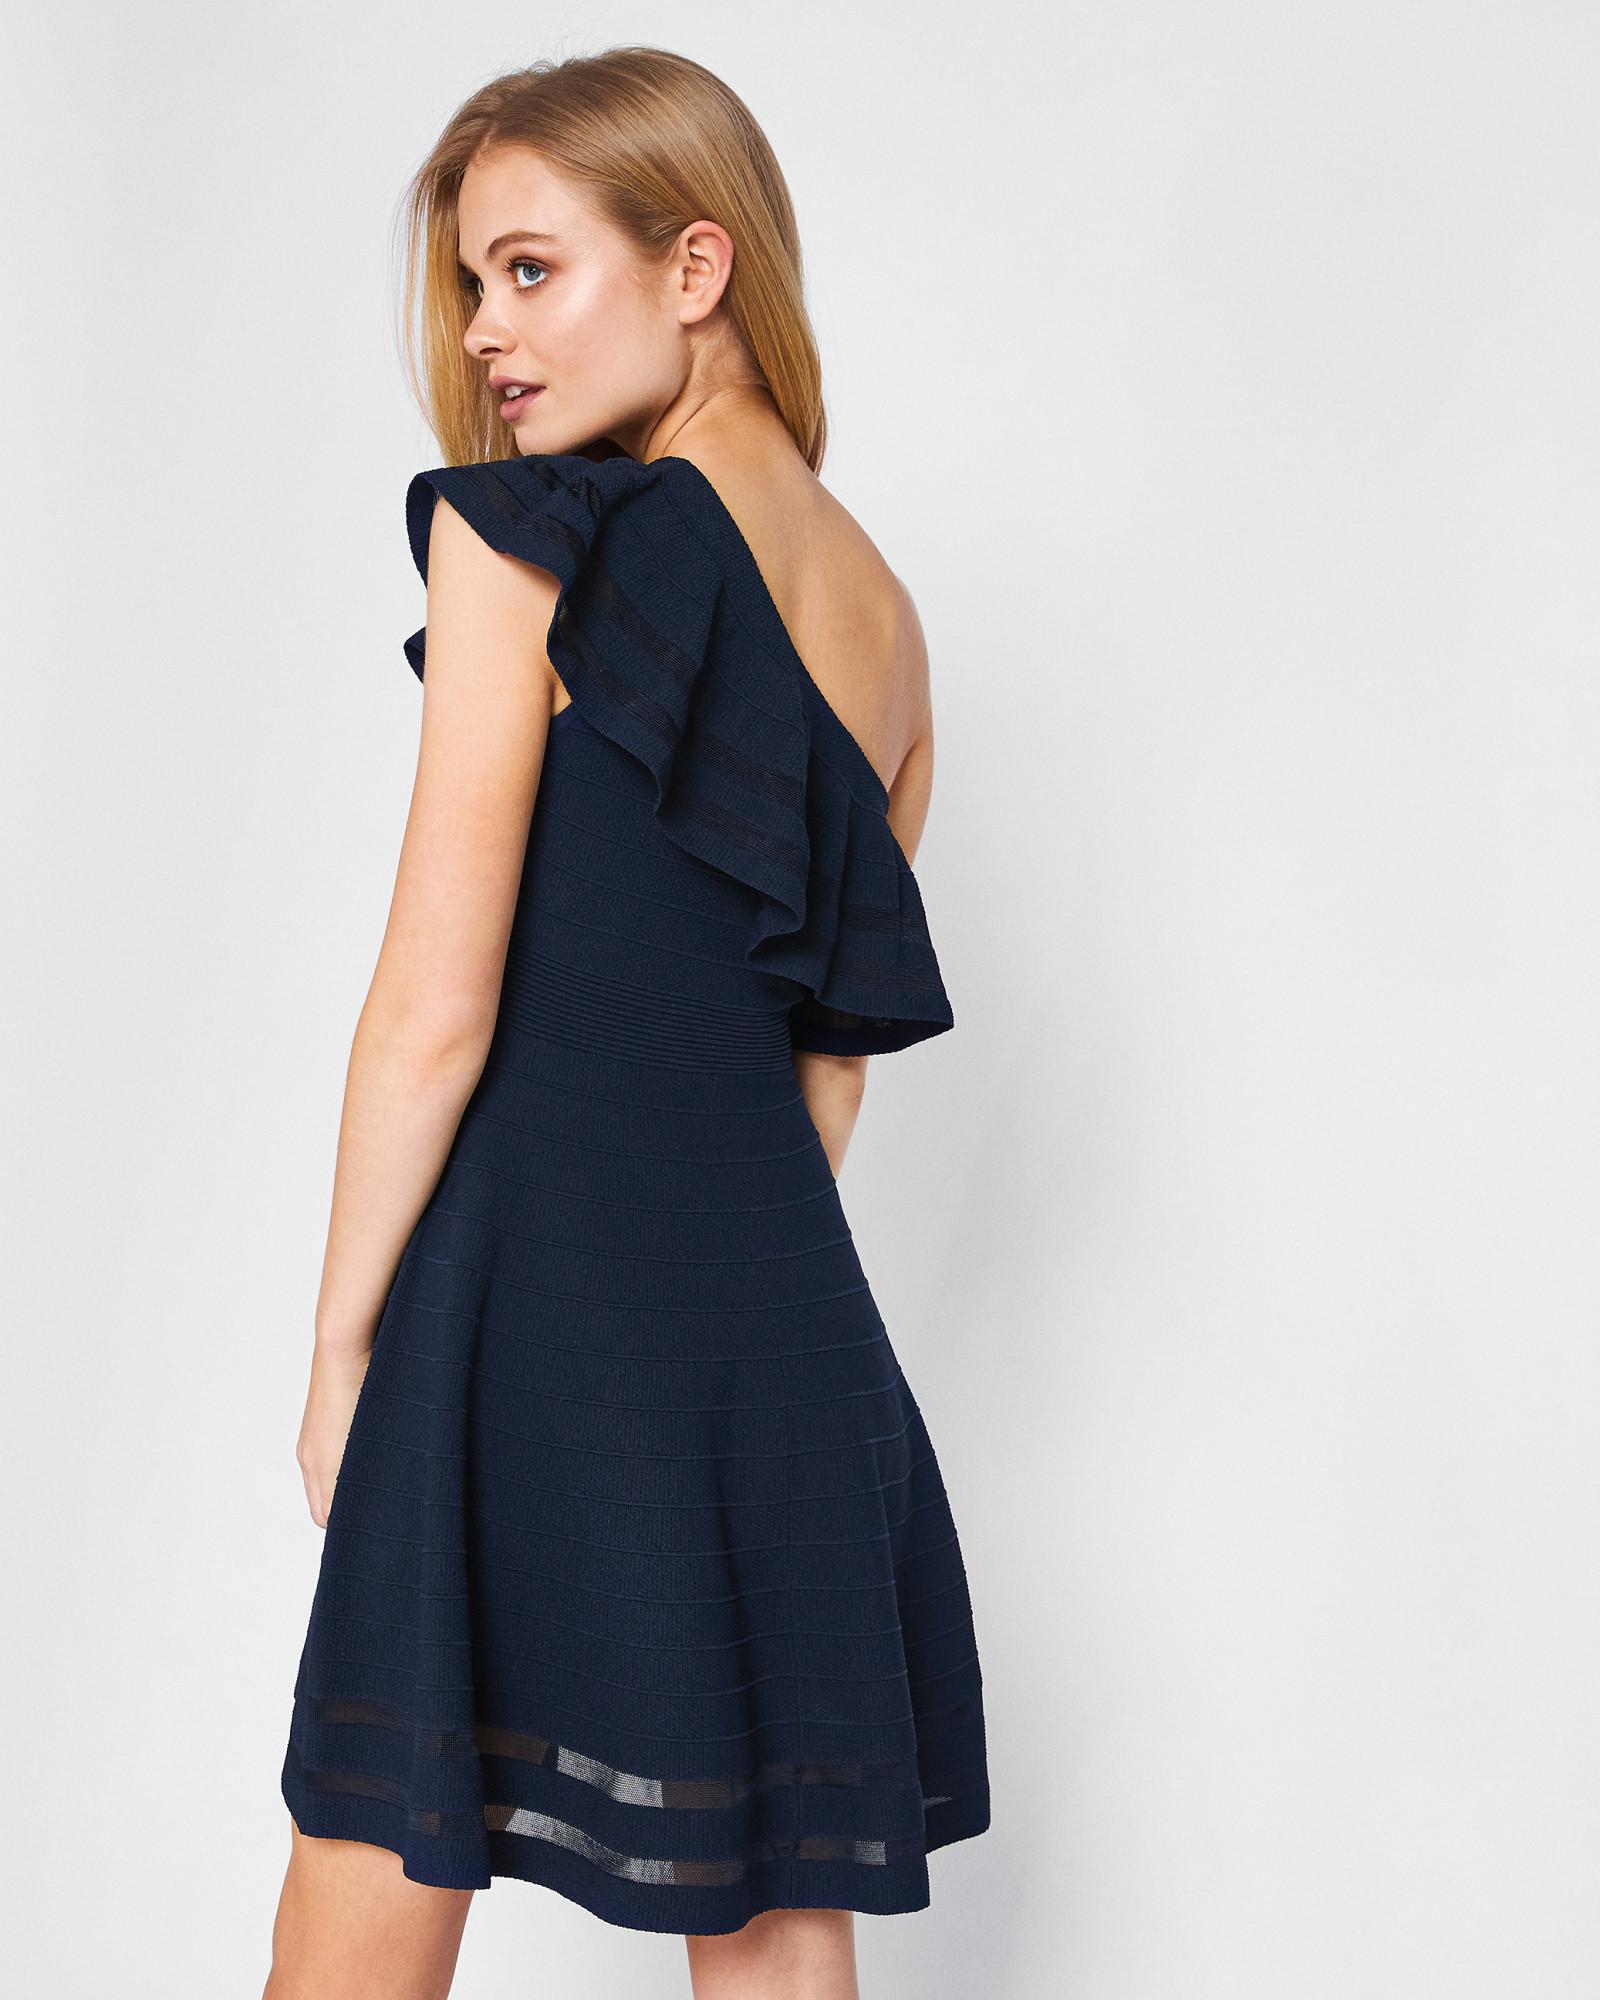 Ted Baker One Shoulder Knitted Dress in Navy (Blue) - Lyst